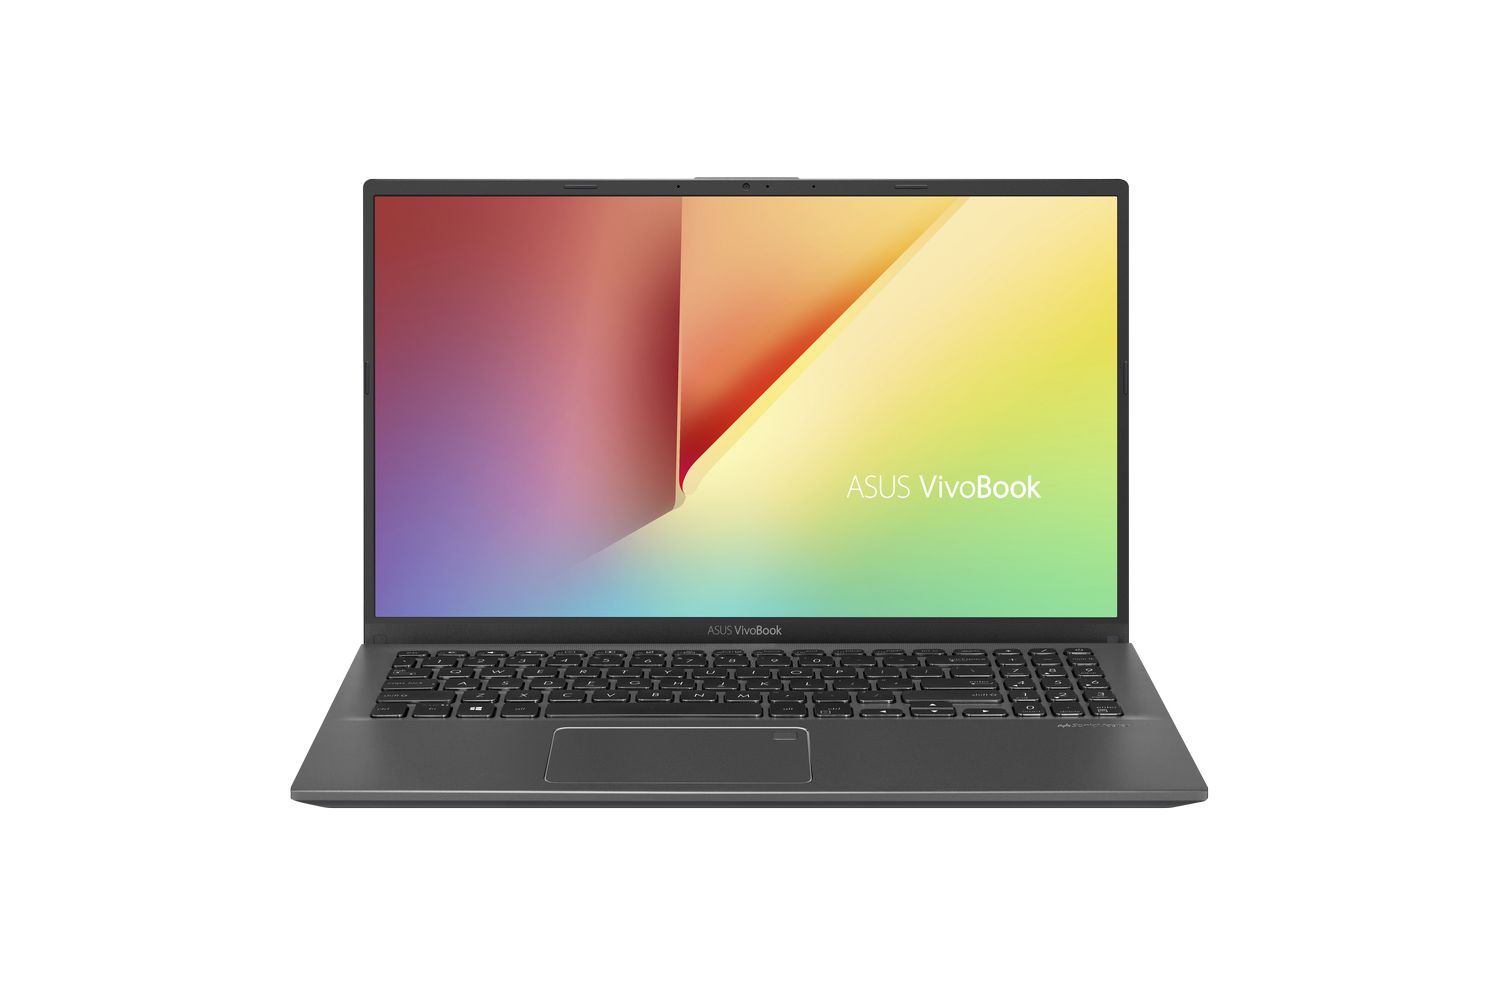 asus introduces zenbook s13 with thinnest bezels ces 2019 vivobook 14 15 see and do more four sided nanoedge display